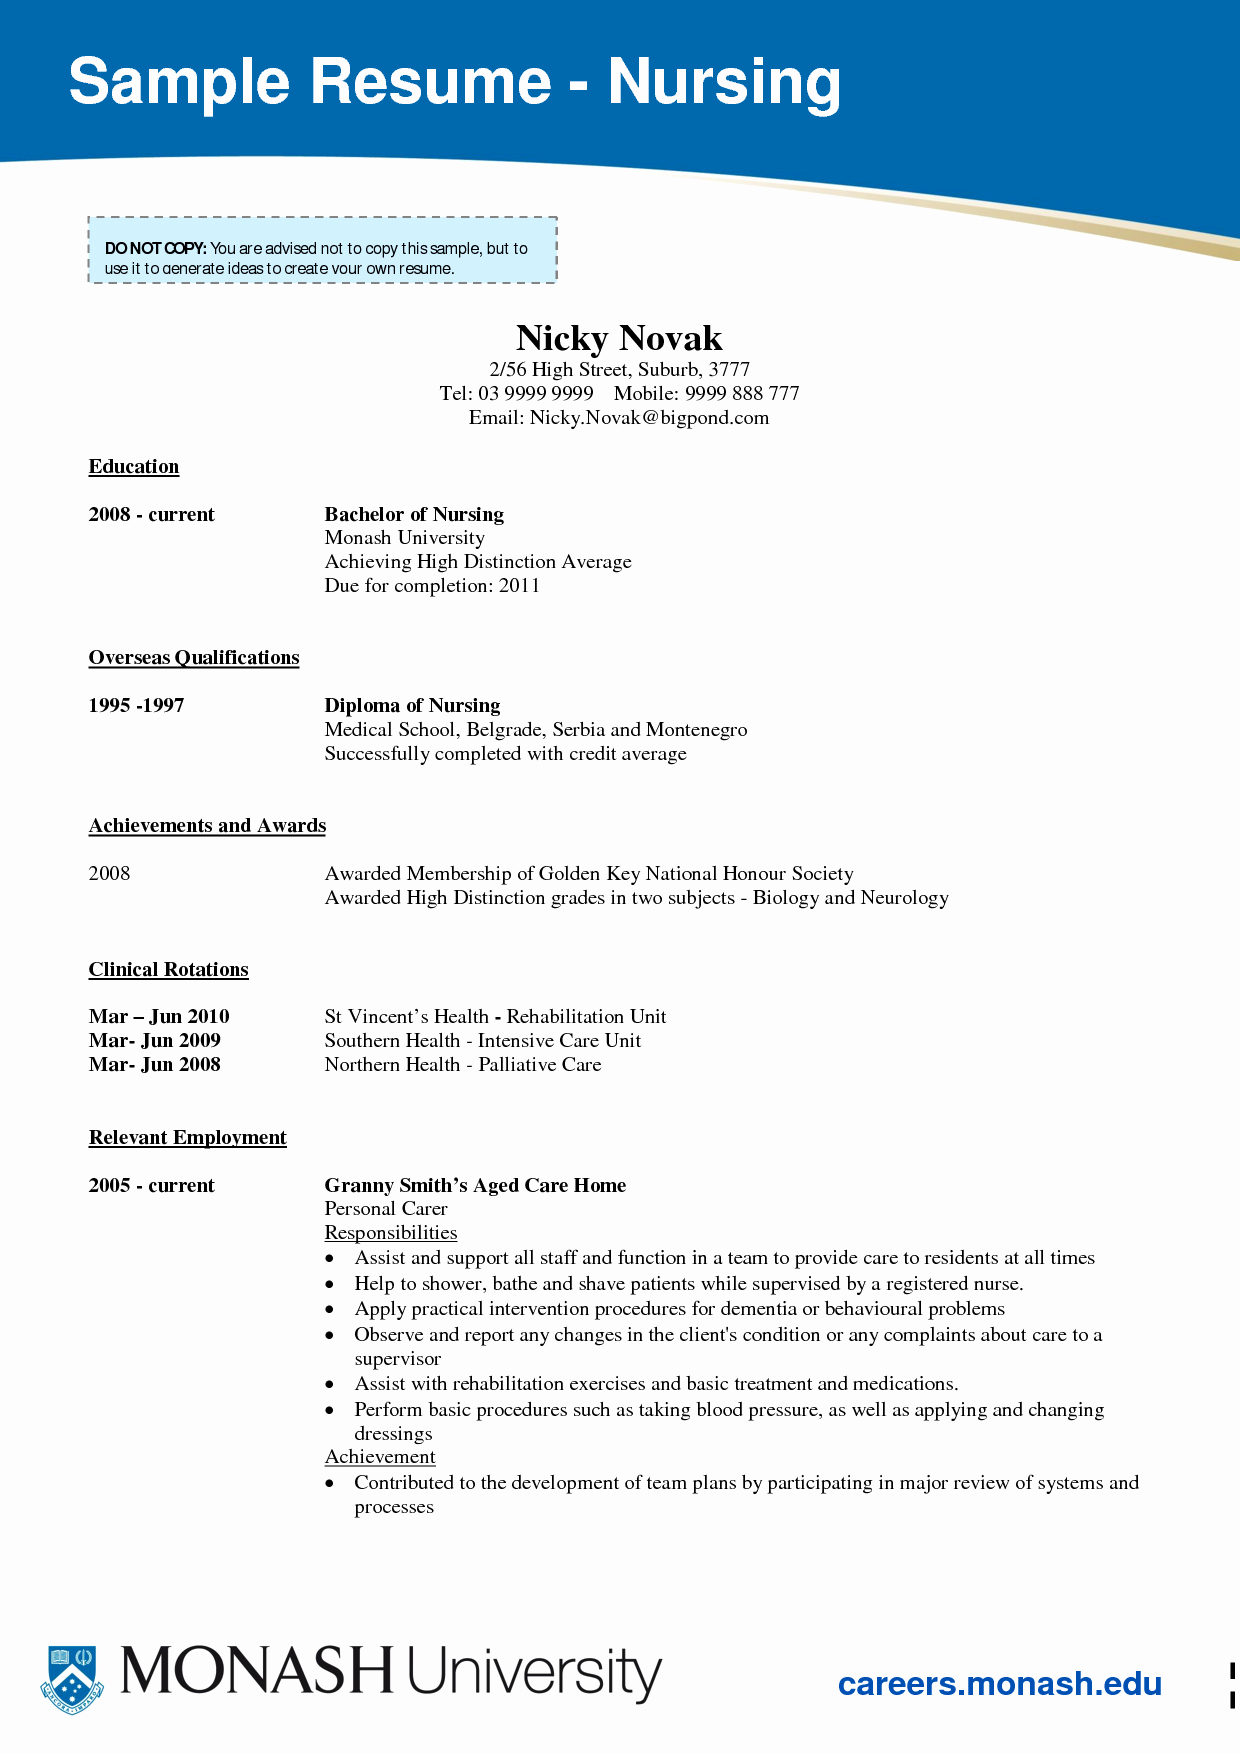 Nursing Student Resume Templates Lovely 22 Student Nurse Resume Examples Sample Resumes Bswn6gg5